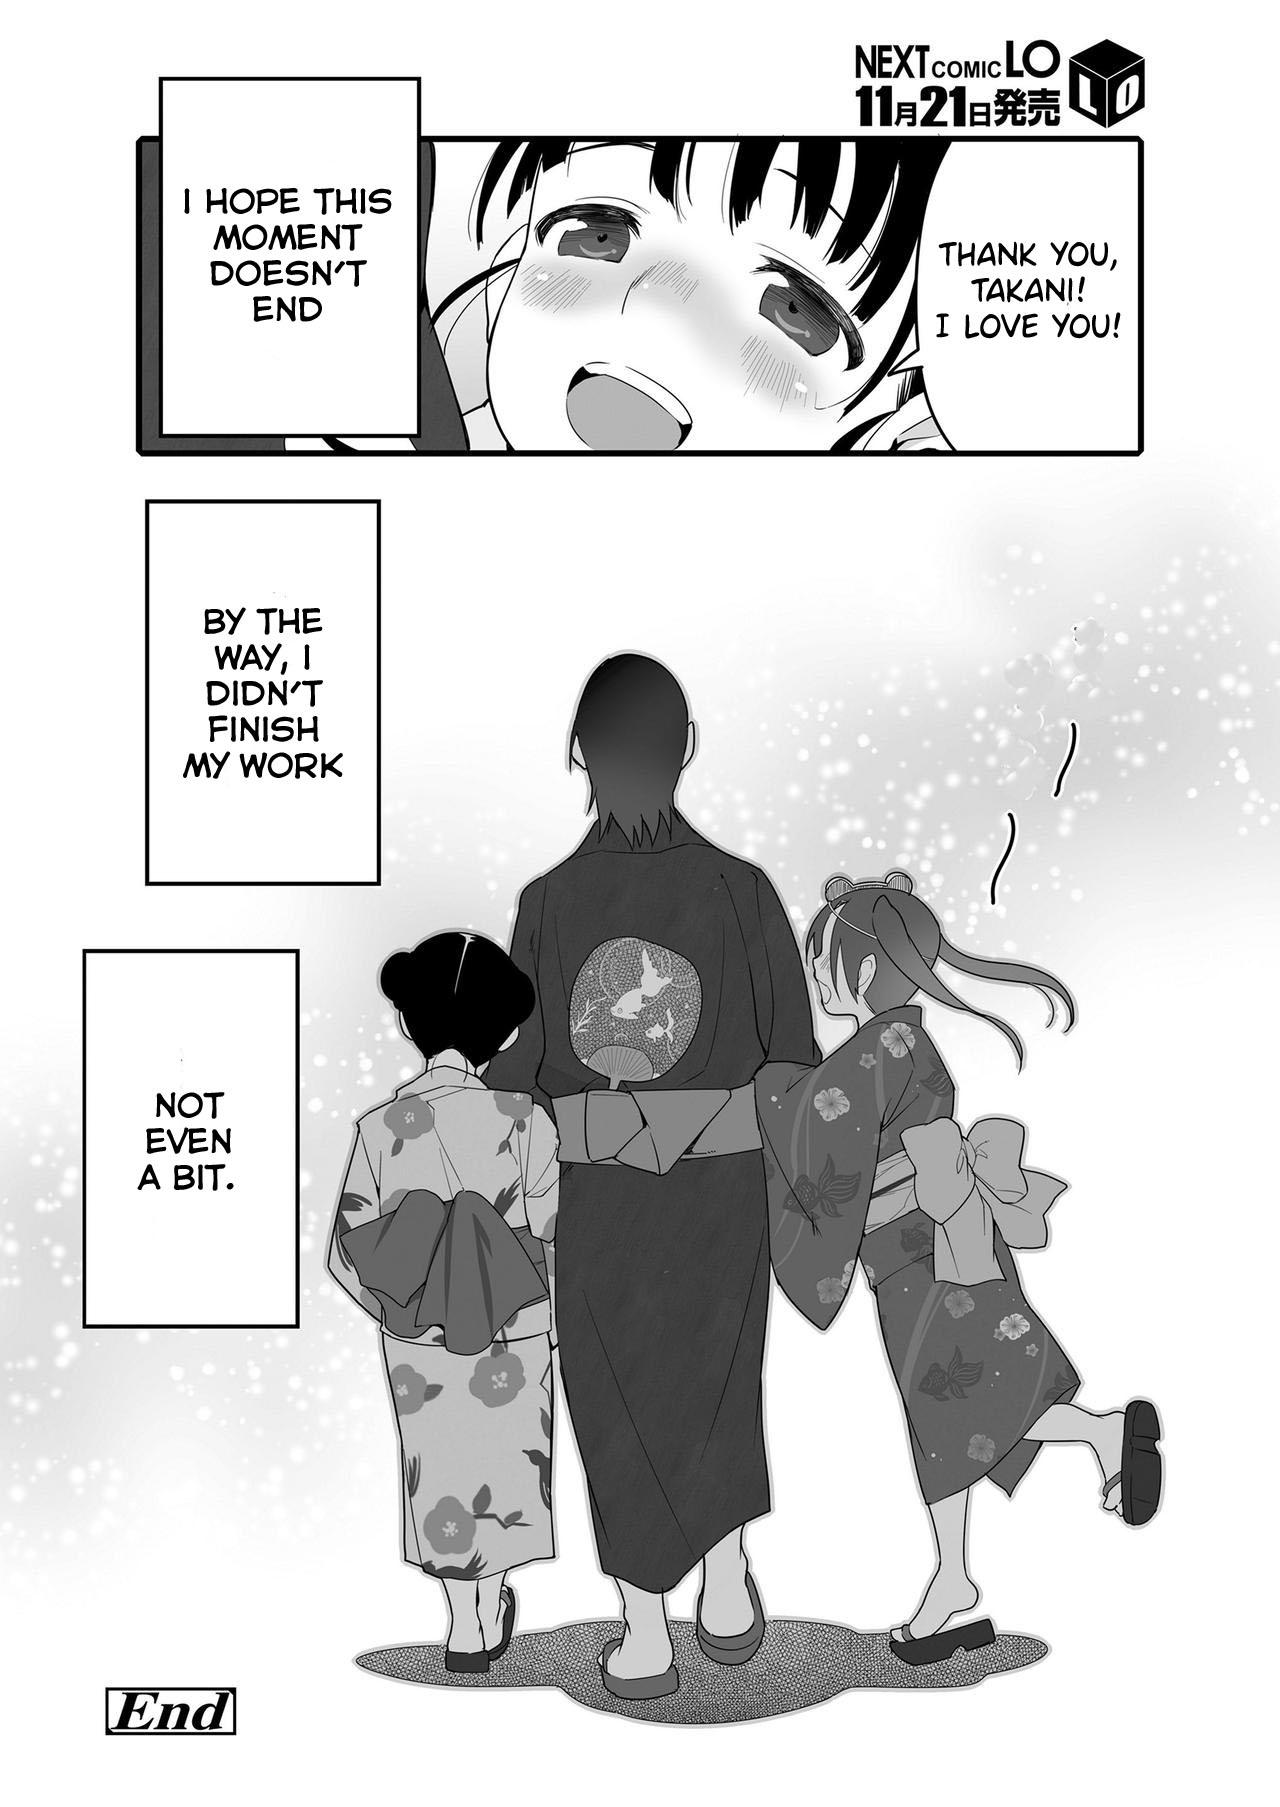 Pussylick Uchiage Hanabi, Ane to Miruka? Imouto to Miruka? | Fireworks, Should we see it with the elder sister or the younger sister? Squirting - Page 24